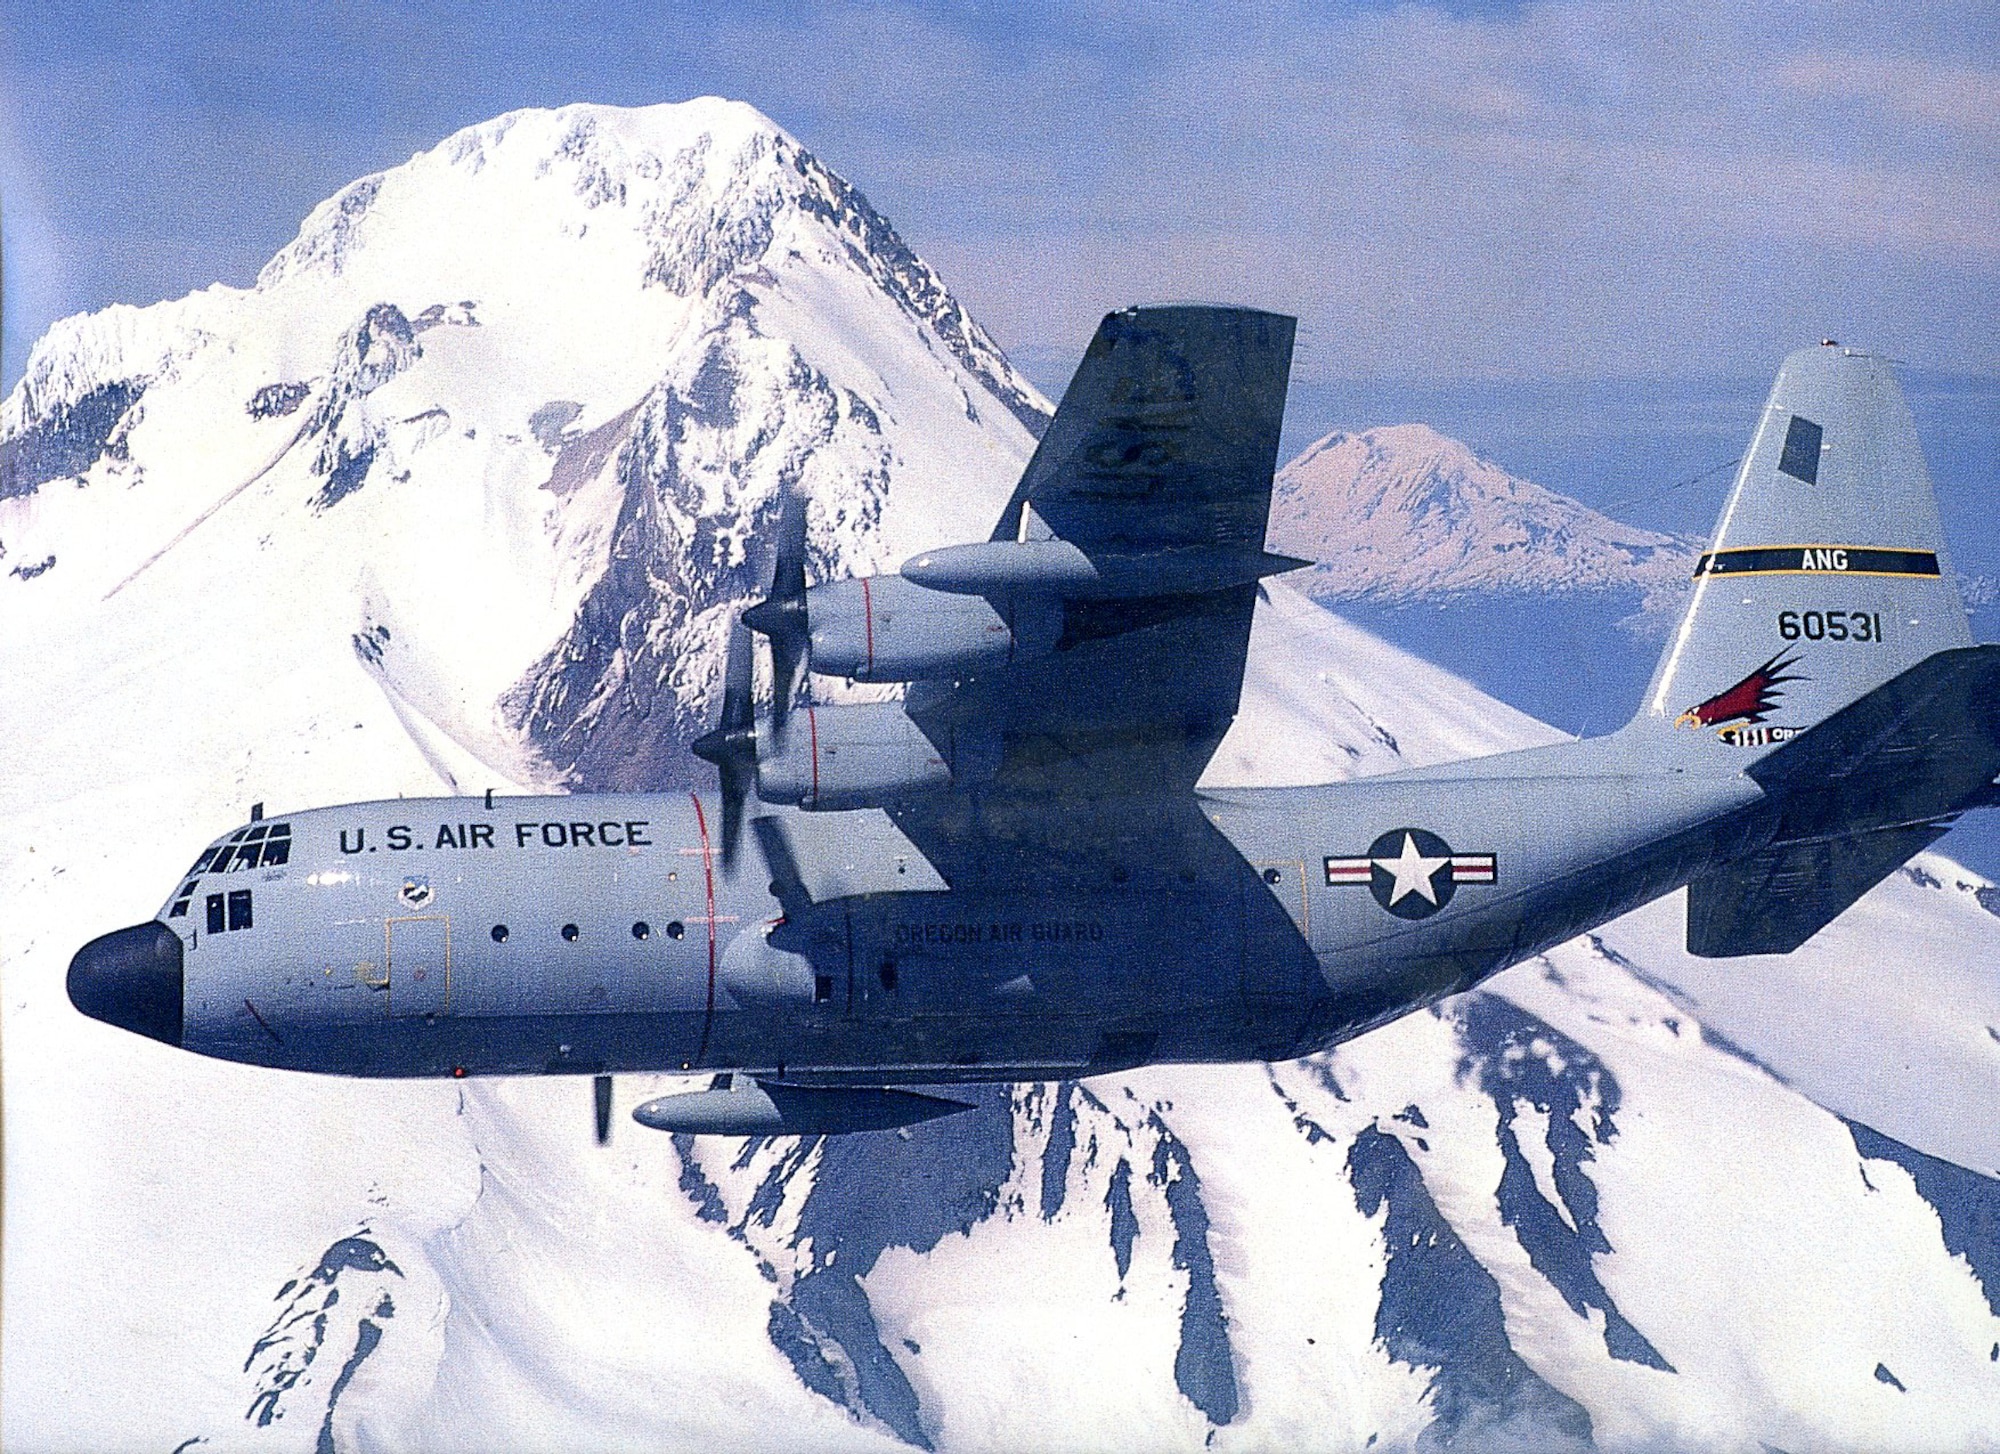 An Oregon Air National Guard C-130 Hercules transport aircraft flys over the Cascade Mountain Range in Oregon. (History photo from 142nd Fighter Wing History Office)